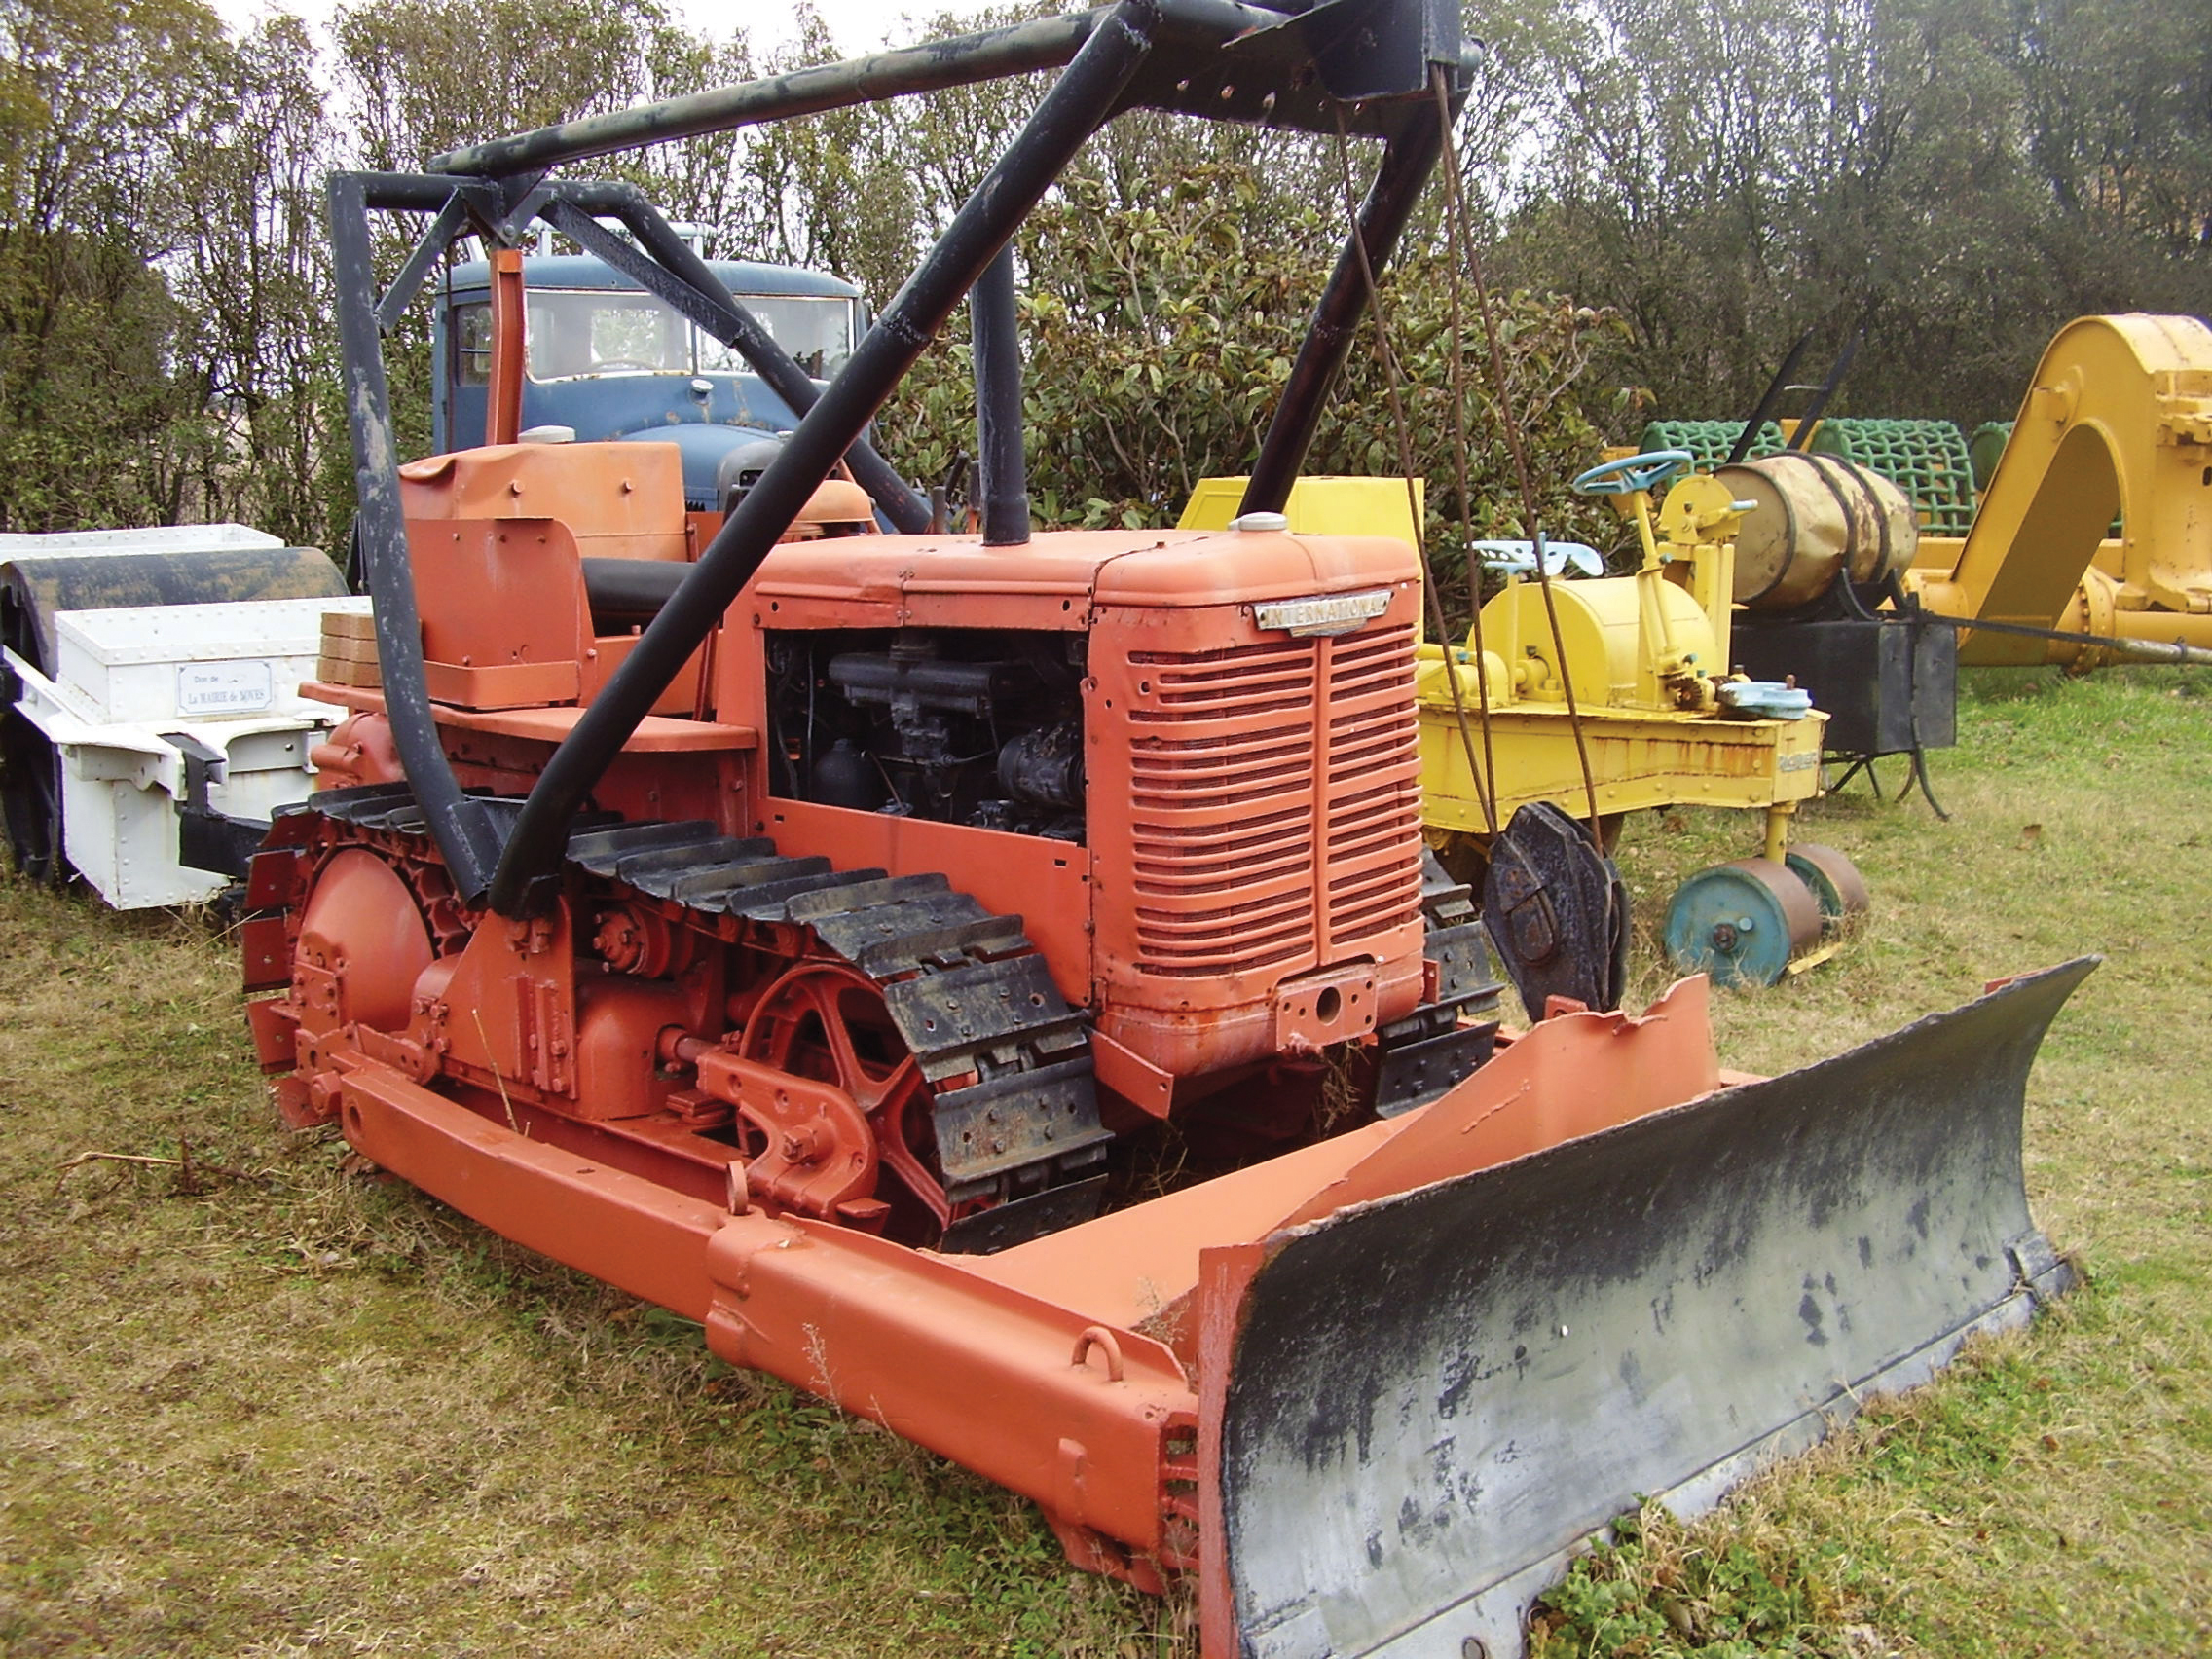 Early bulldozer with cable operated blade